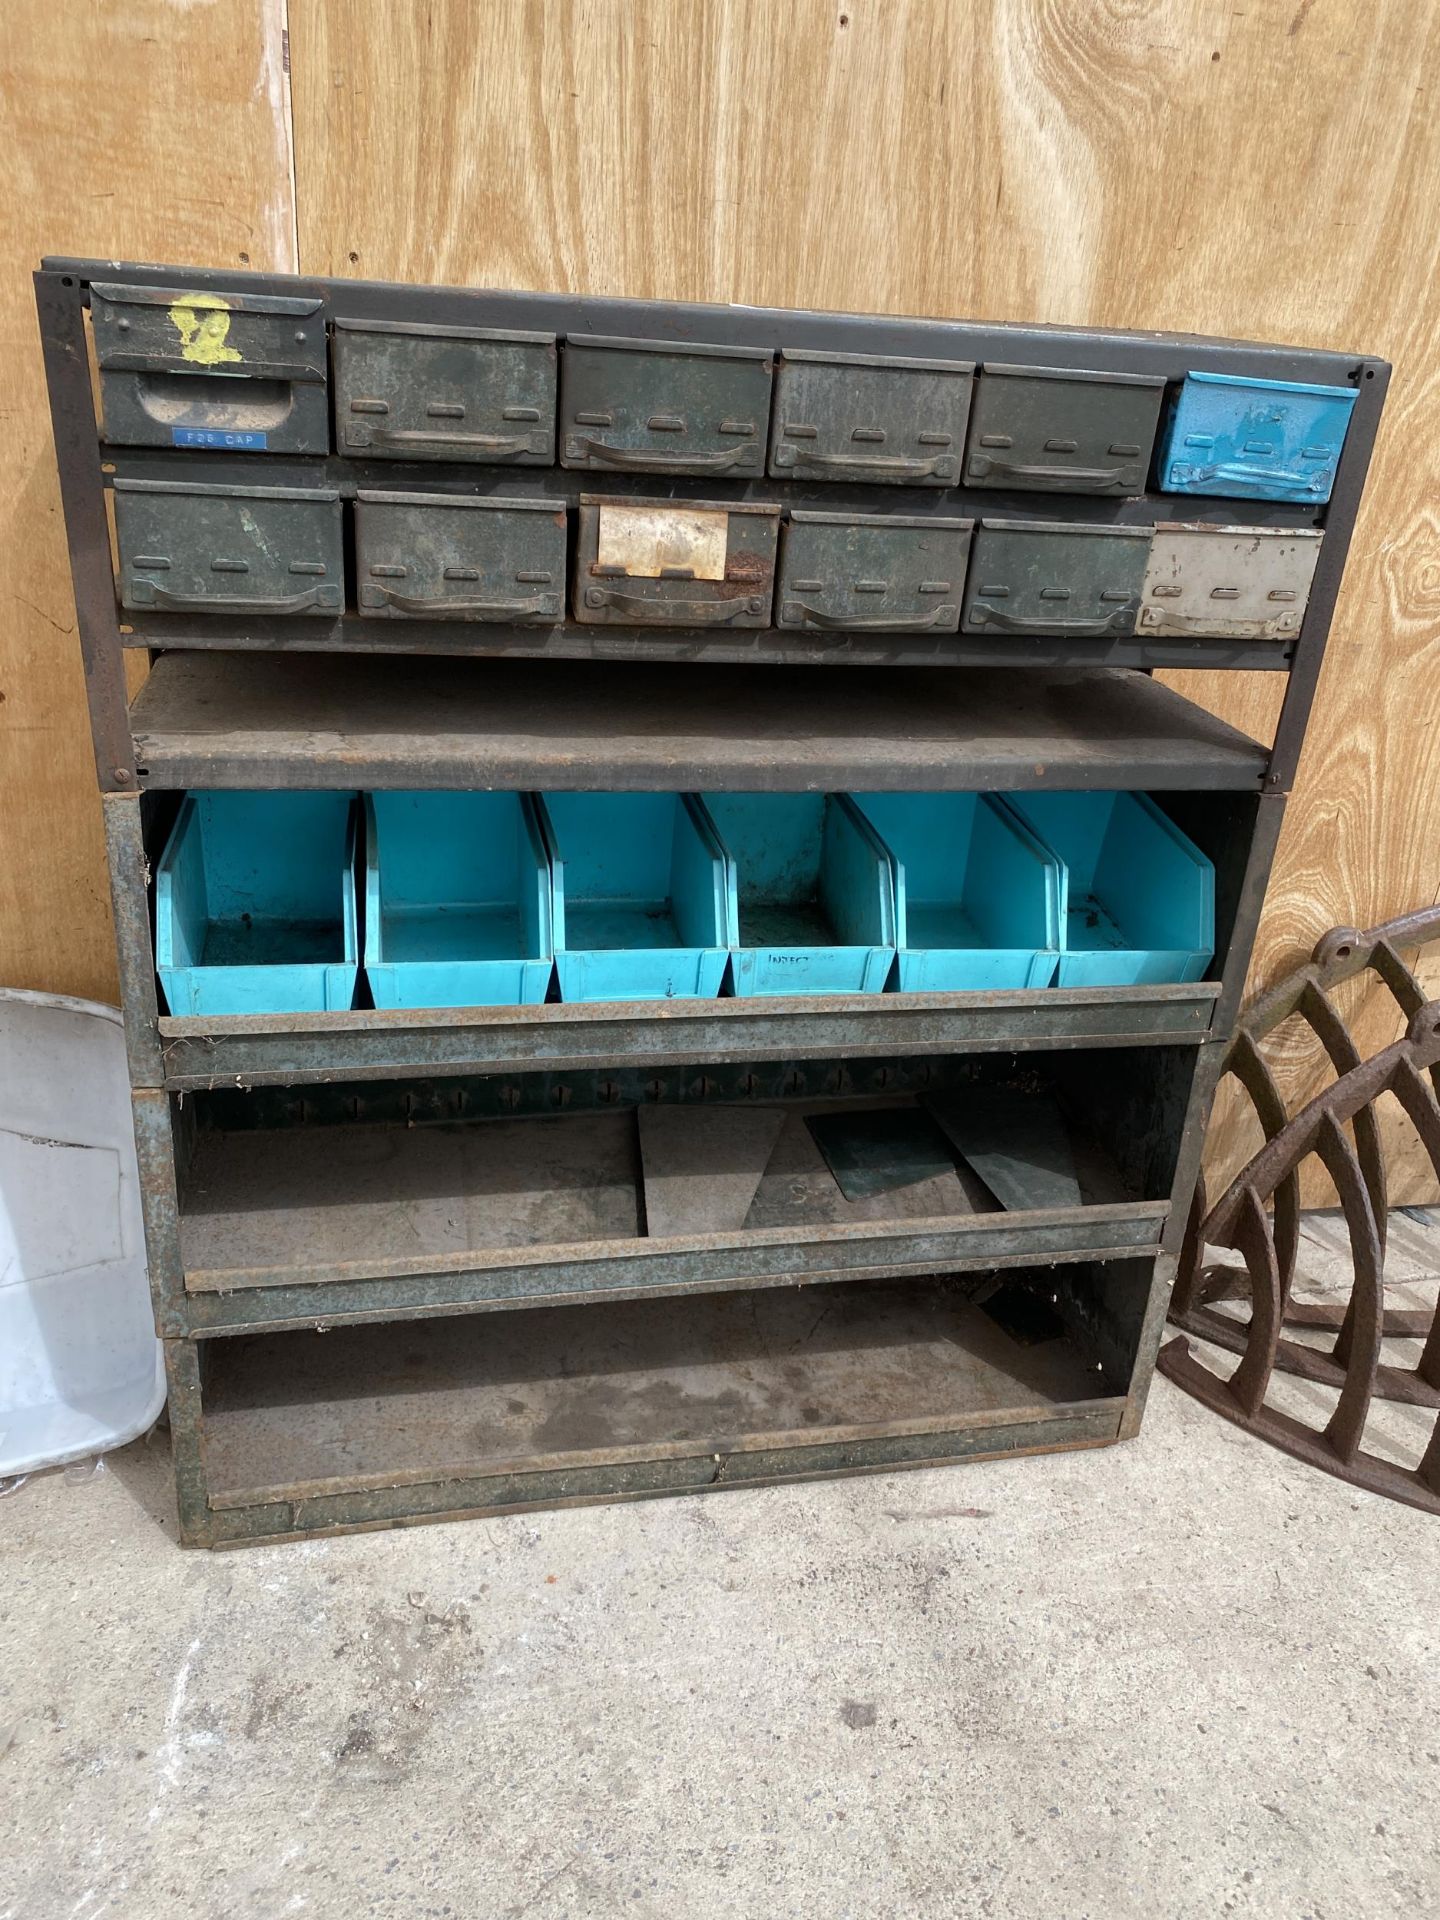 A VINTAGE TOOL STORAGE UNIT WITH UPPER INDIVIDUAL TRAY DRAWERS AND LOWER SHELVES